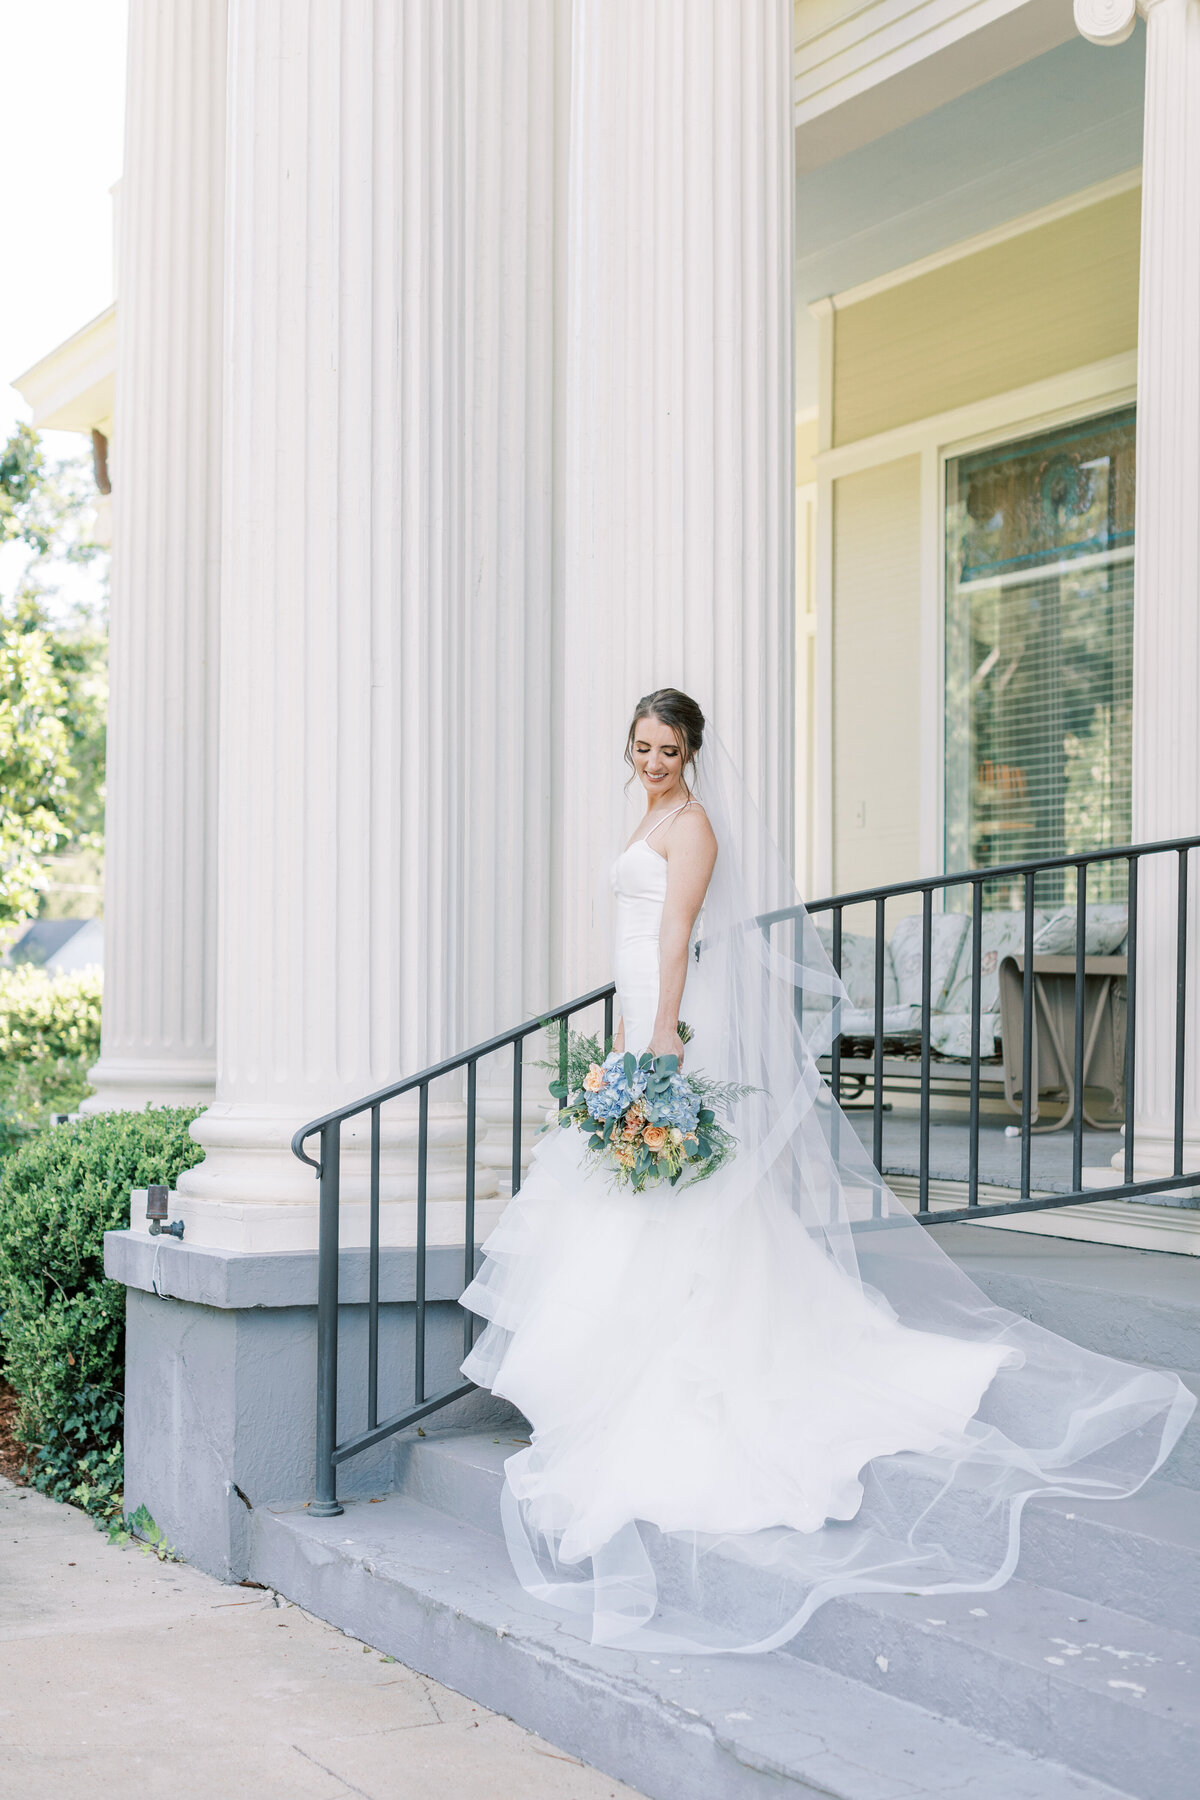 A bride looks down at her bouquet while standing by a white column.